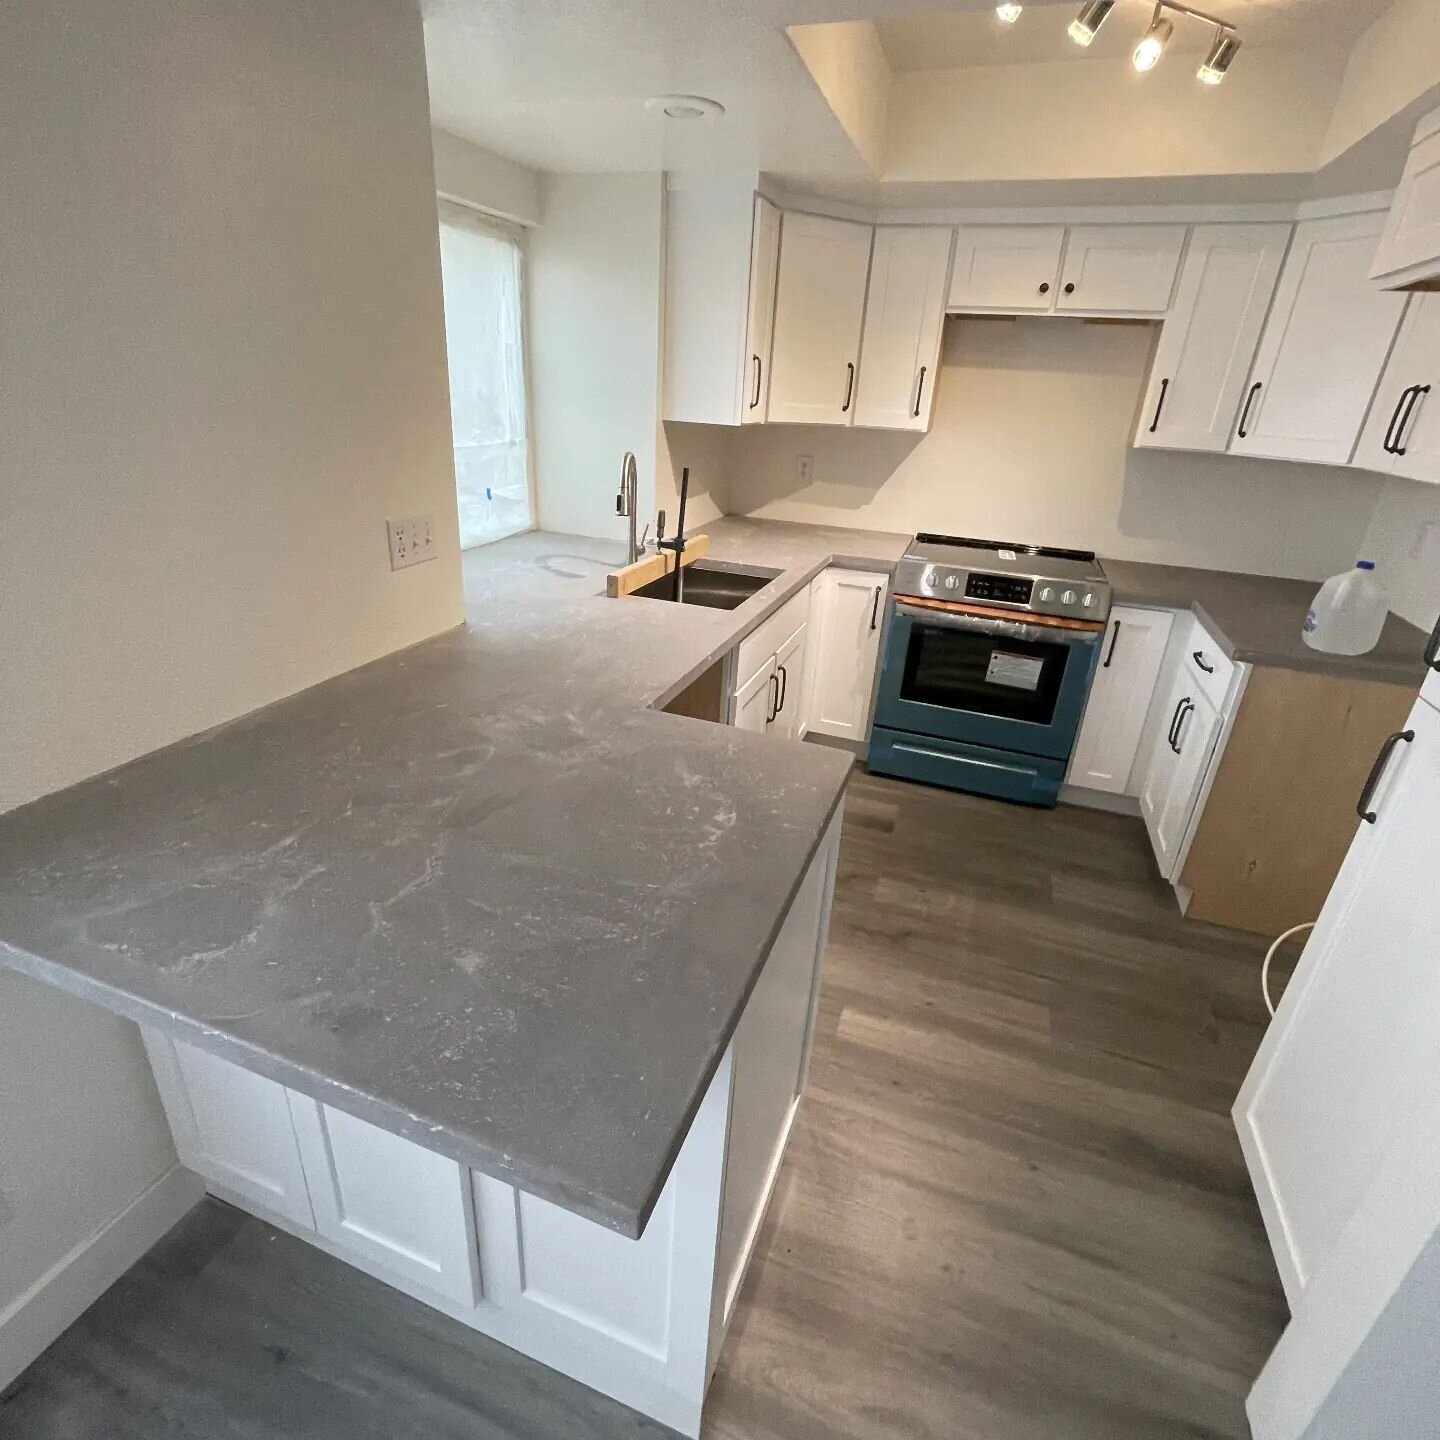 Little space, massive counter top!
This has our veining design with grey and white colors. This one top has it all. Bar seating, sink, window sill all in one seamless top!

#concretecountertops #concretefurniture #interiordesign #customcounters #phoe